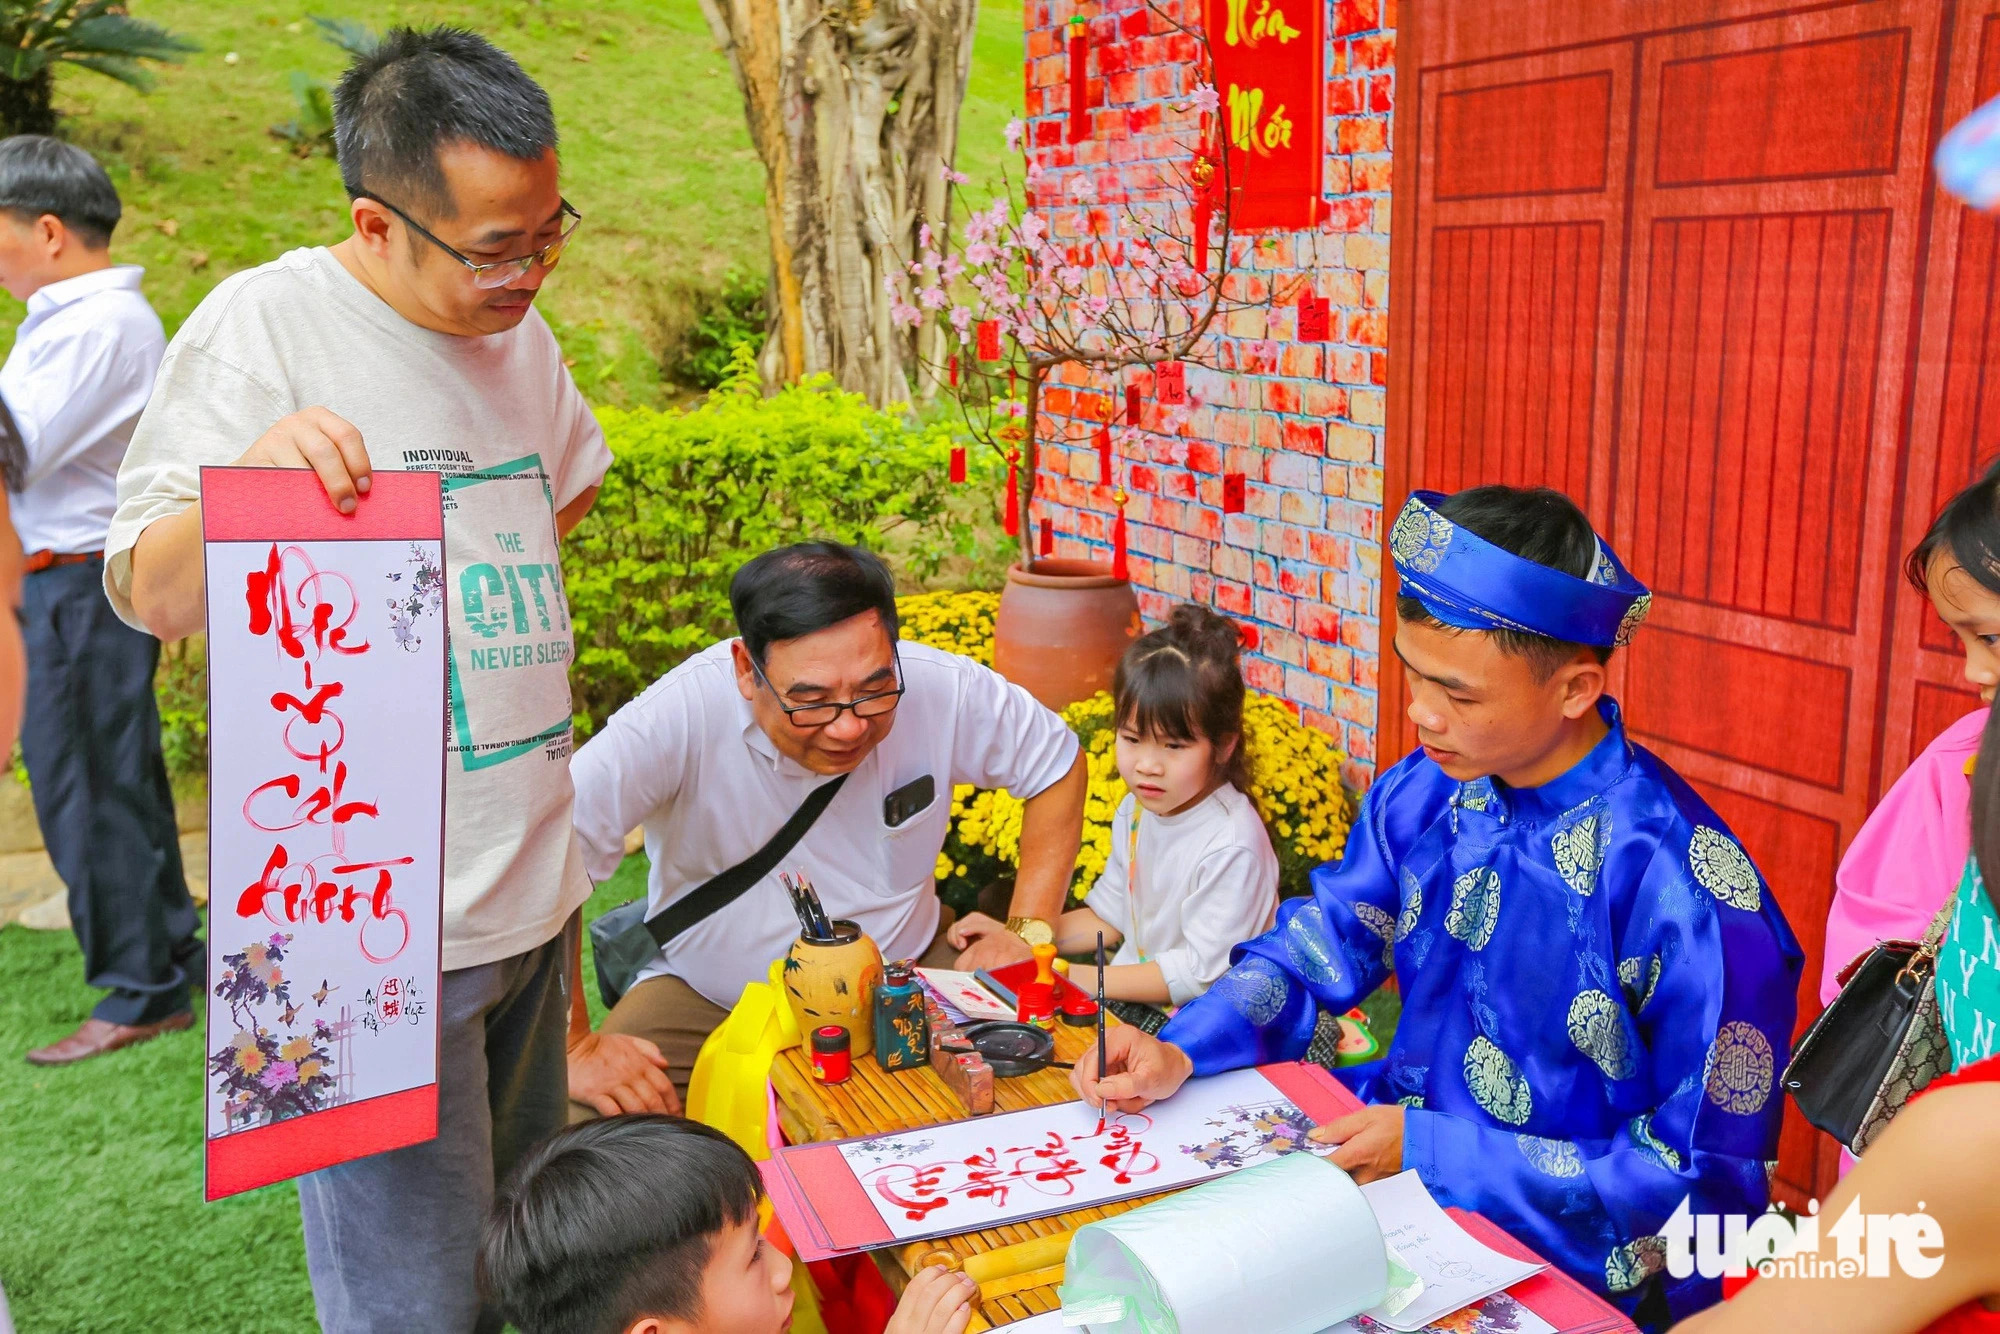 Lots of Tet activities are set to take place in Da Nang City, central Vietnam to serve the locals and tourists during the upcoming Lunar New Year, or Tet. Photo: BH / Tuoi Tre